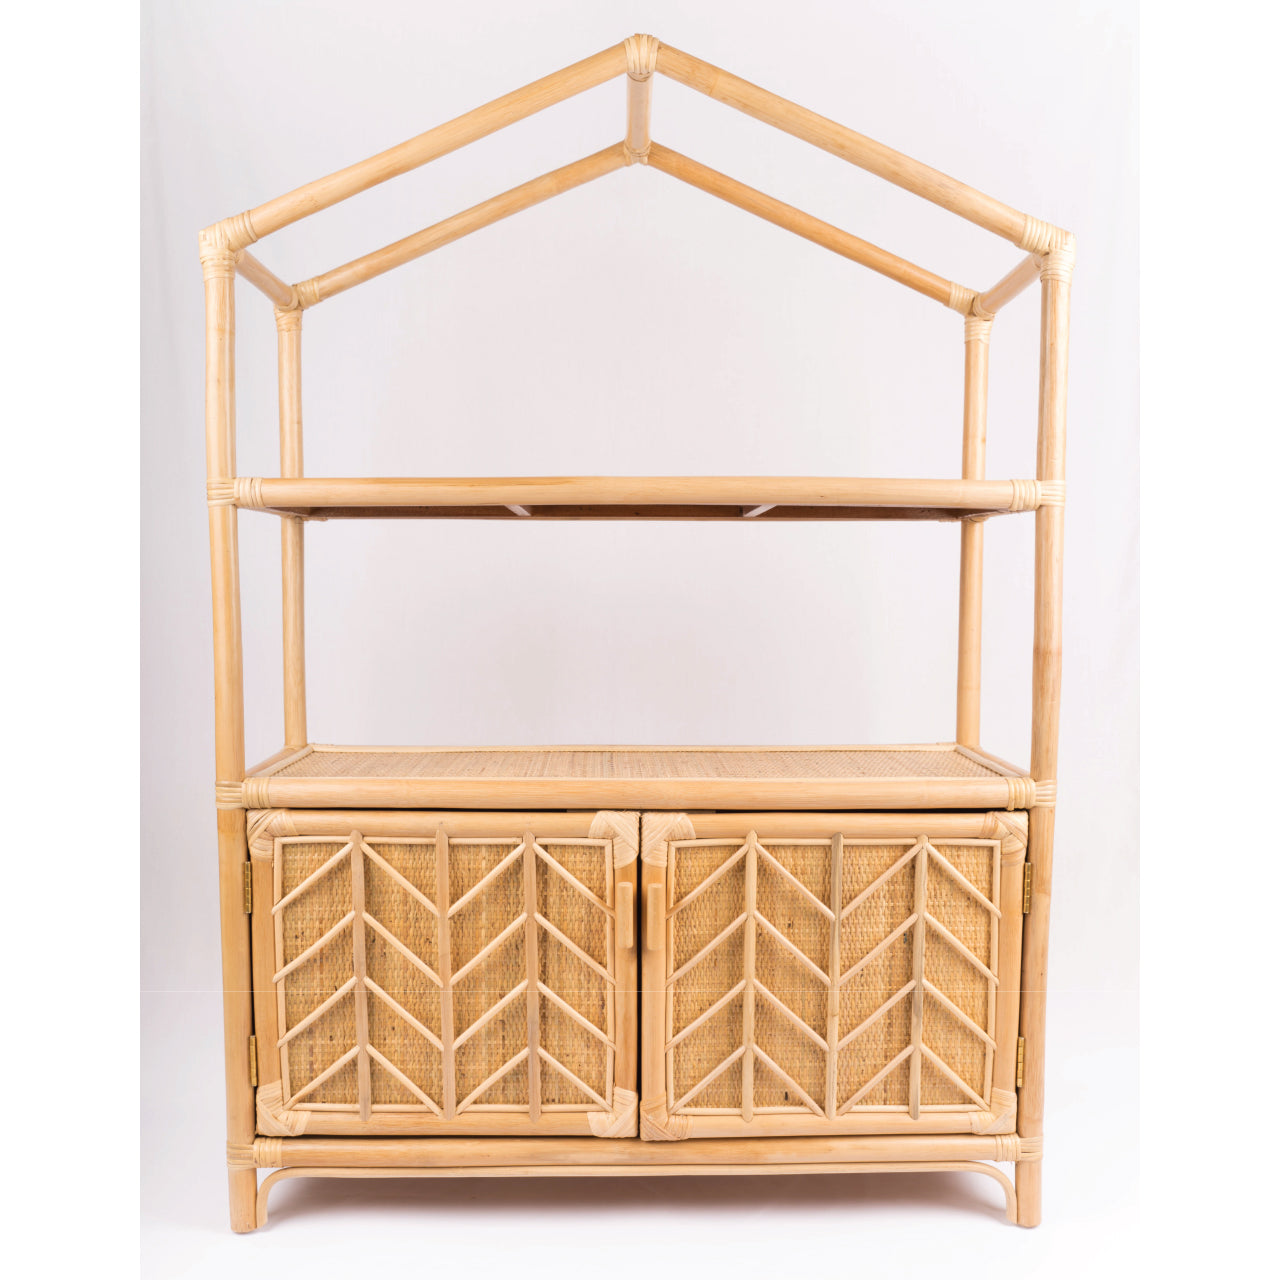 Load image into Gallery viewer, Stef&amp;#39;s Cosy Home Display and Storage House Shelf | Shop Rattan Furniture and Toys Online | Kathy&amp;#39;s Cove
